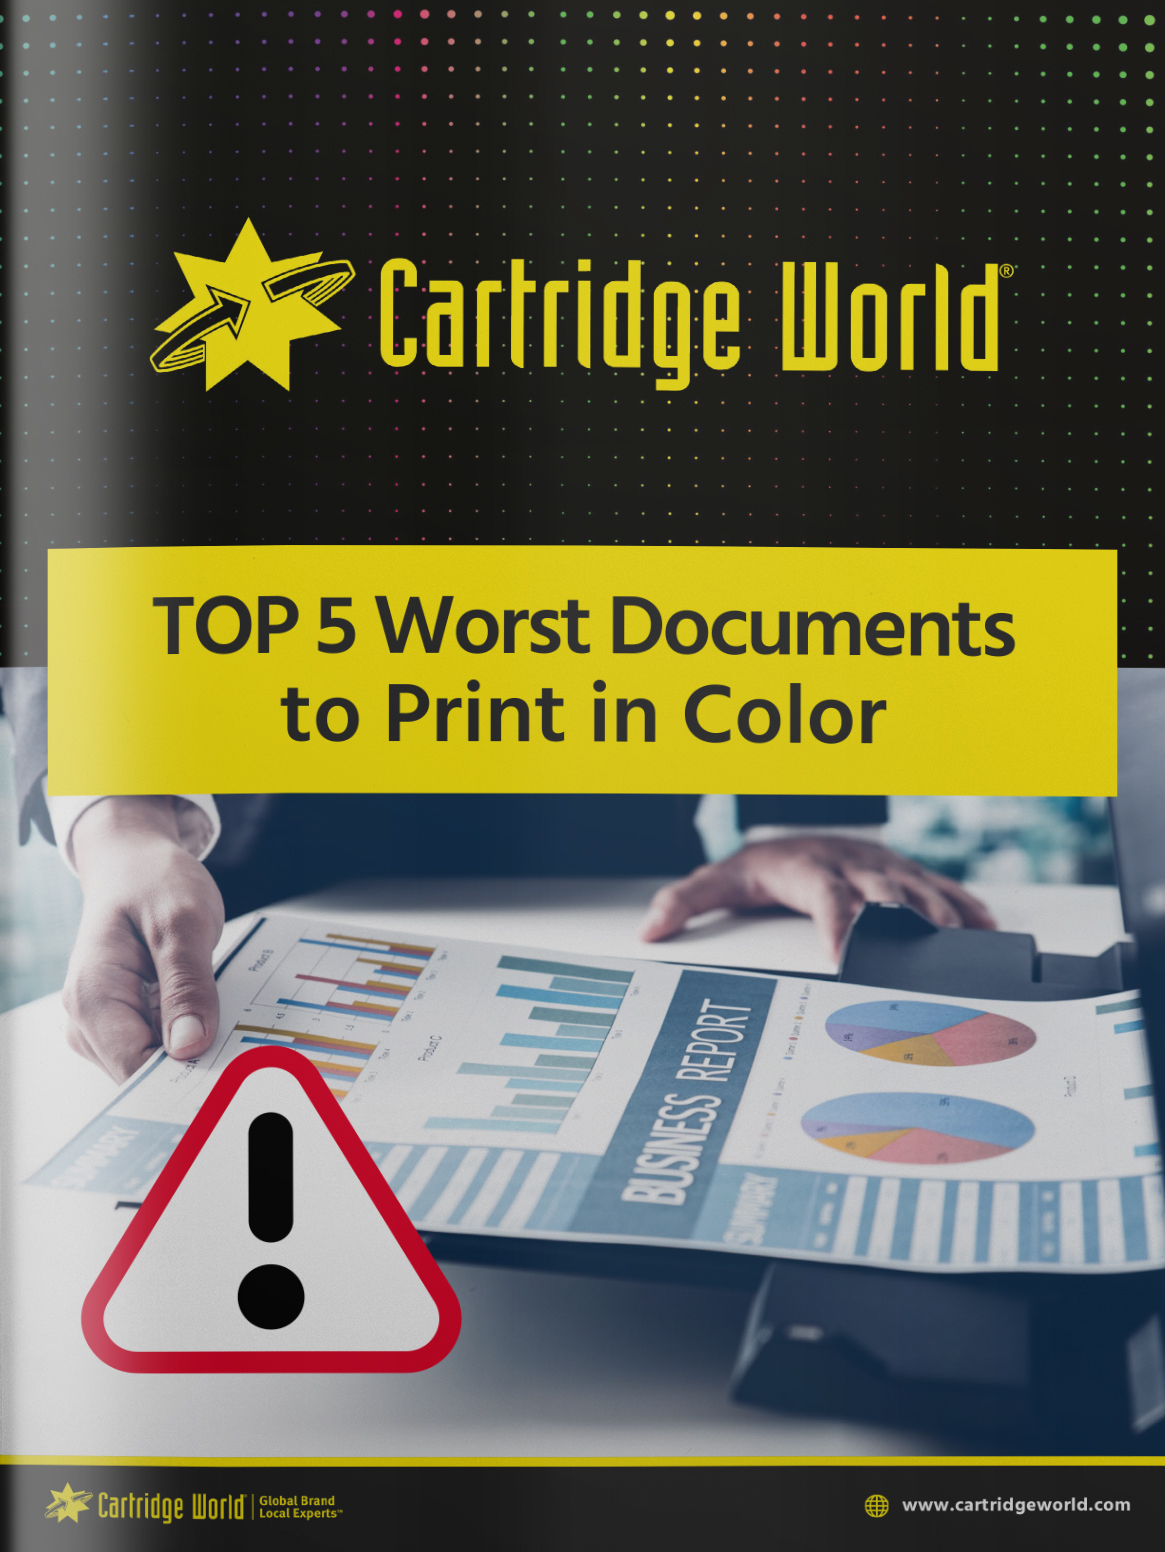 Worst Documents to Print in Color